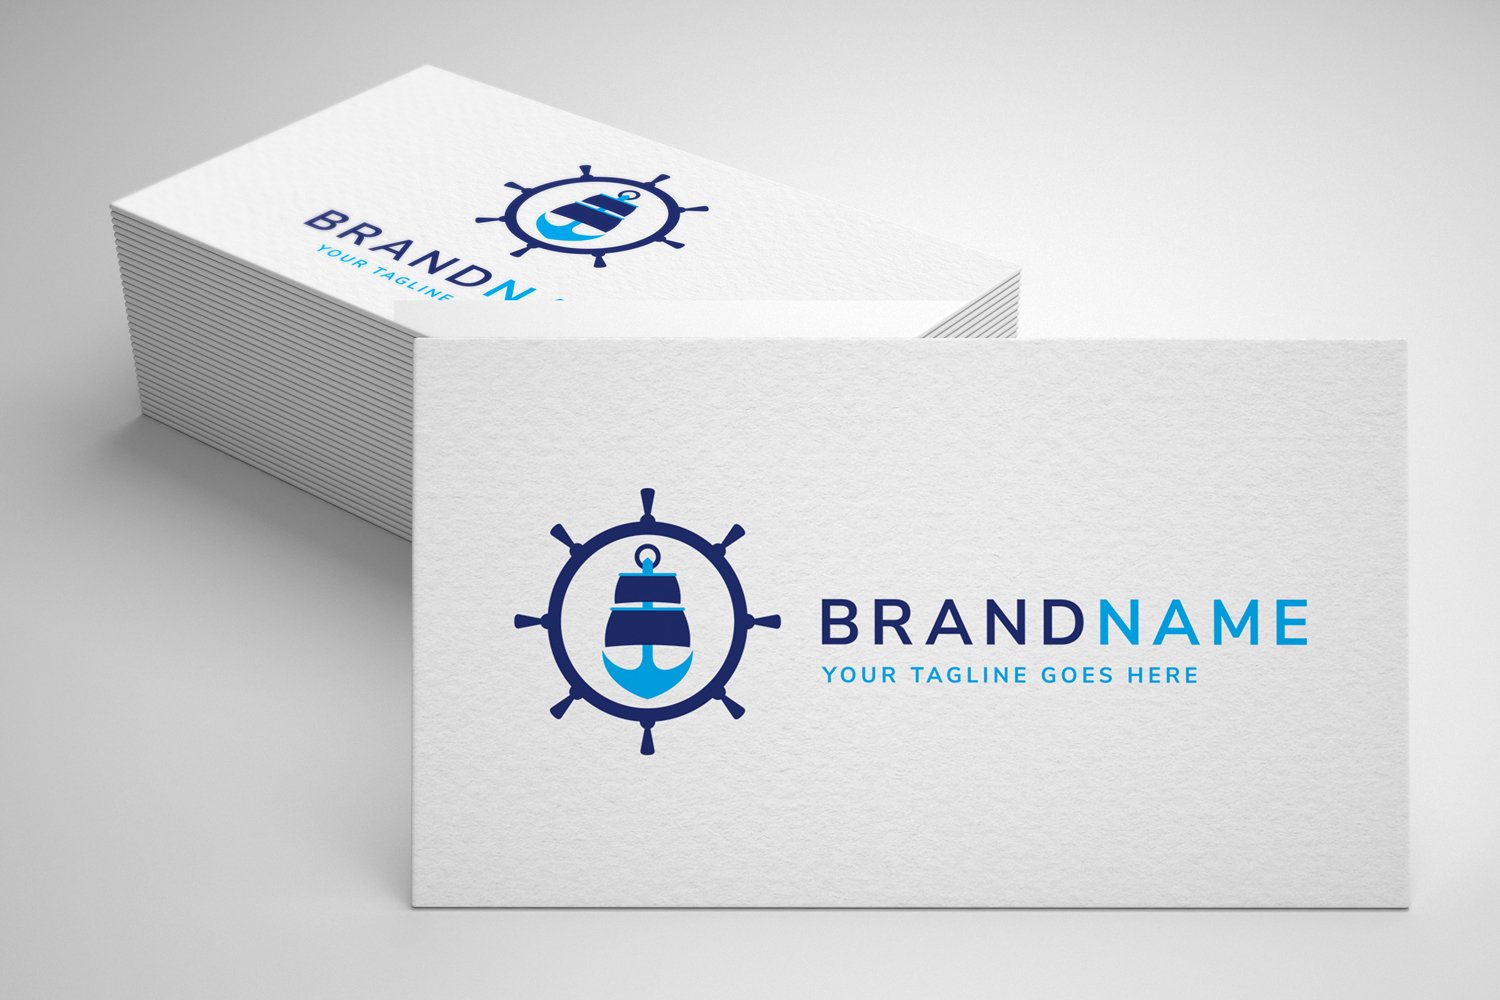 Classic business cards with bicolor navy logos.